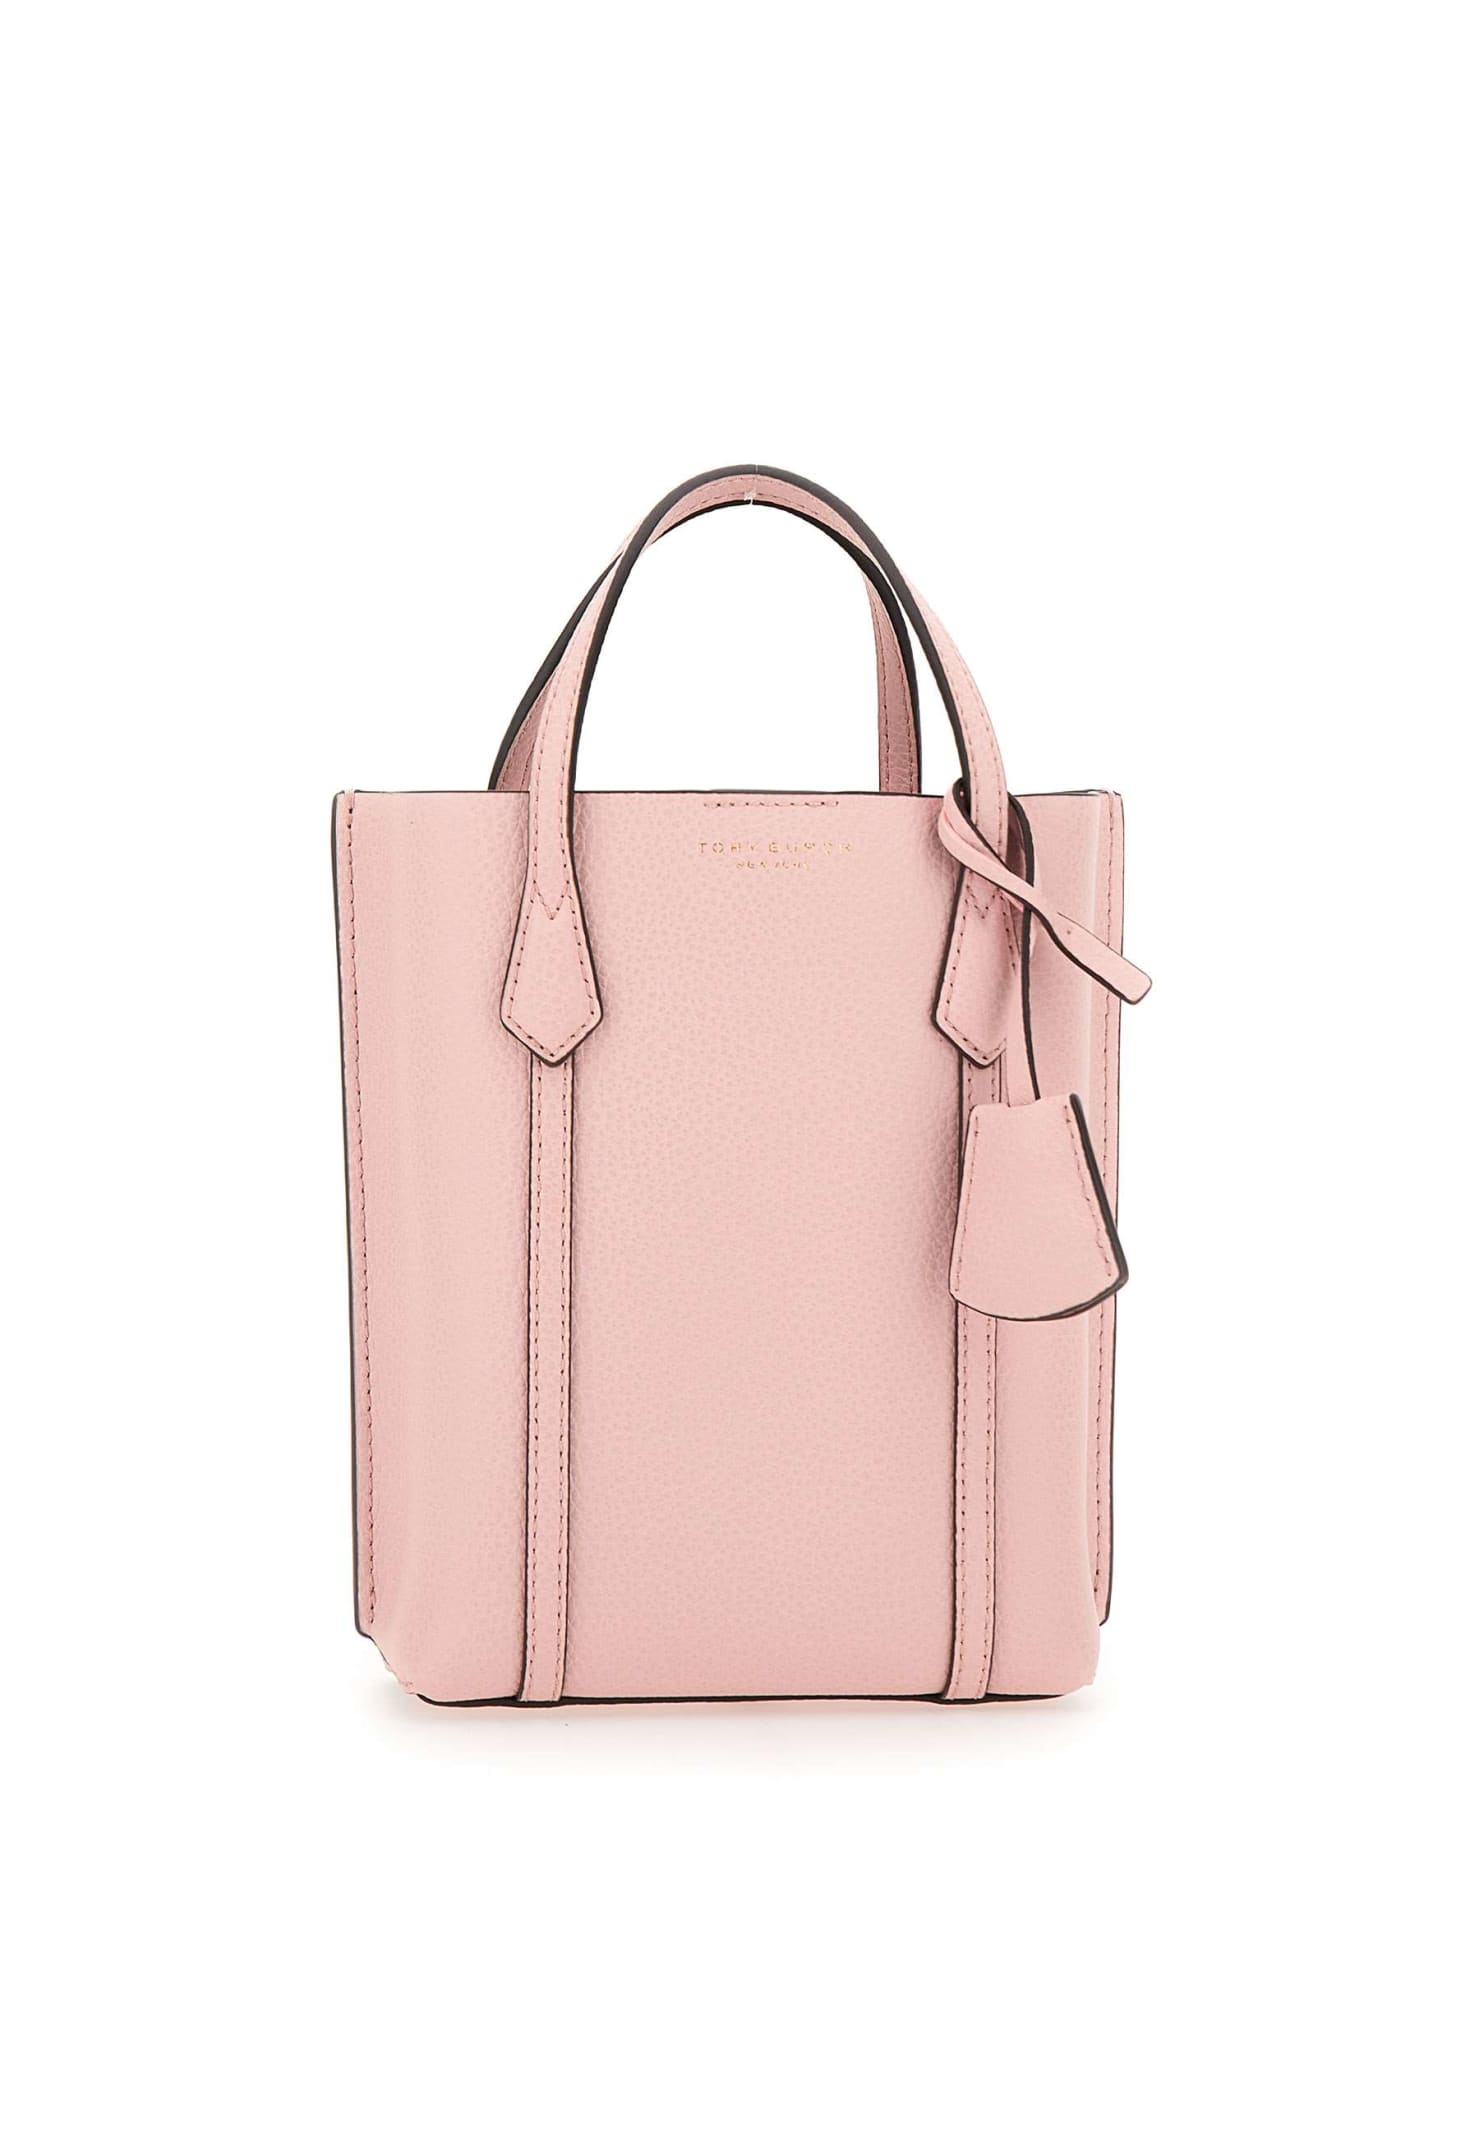 Tory Burch Women's Mini Perry Leather Tote - Shell Pink One-Size